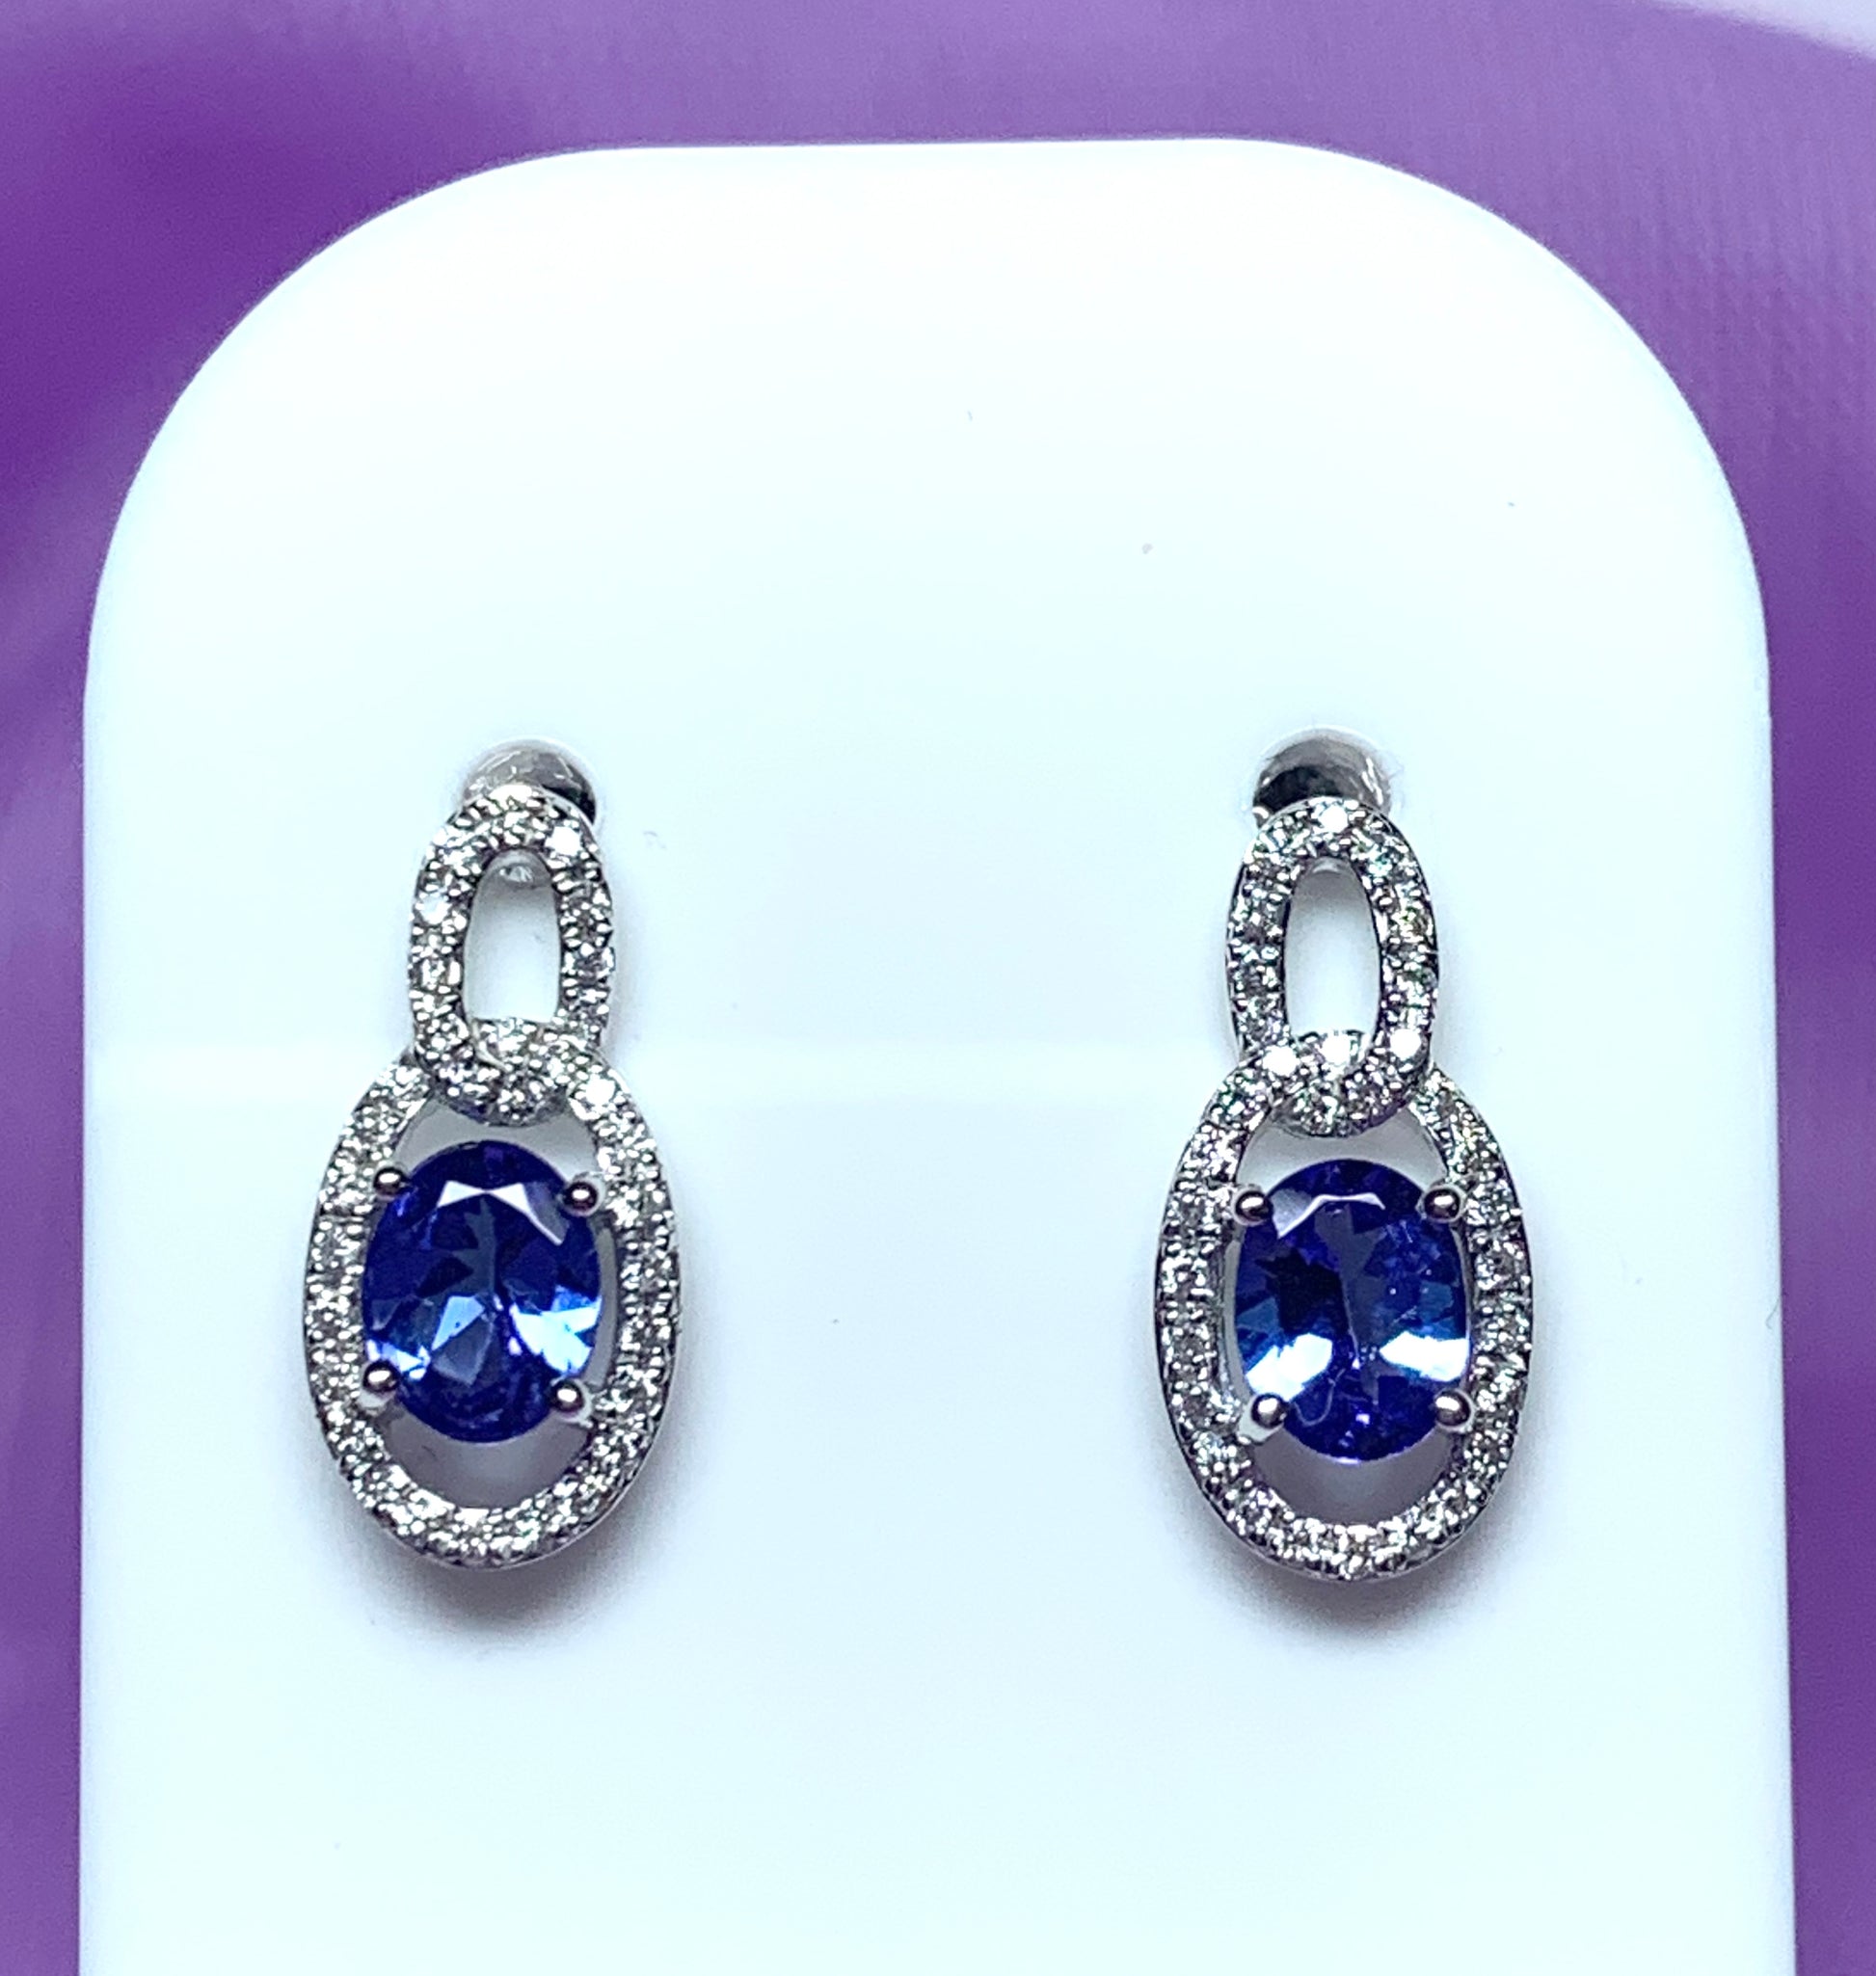 Oval cluster tanzanite and diamond earrings